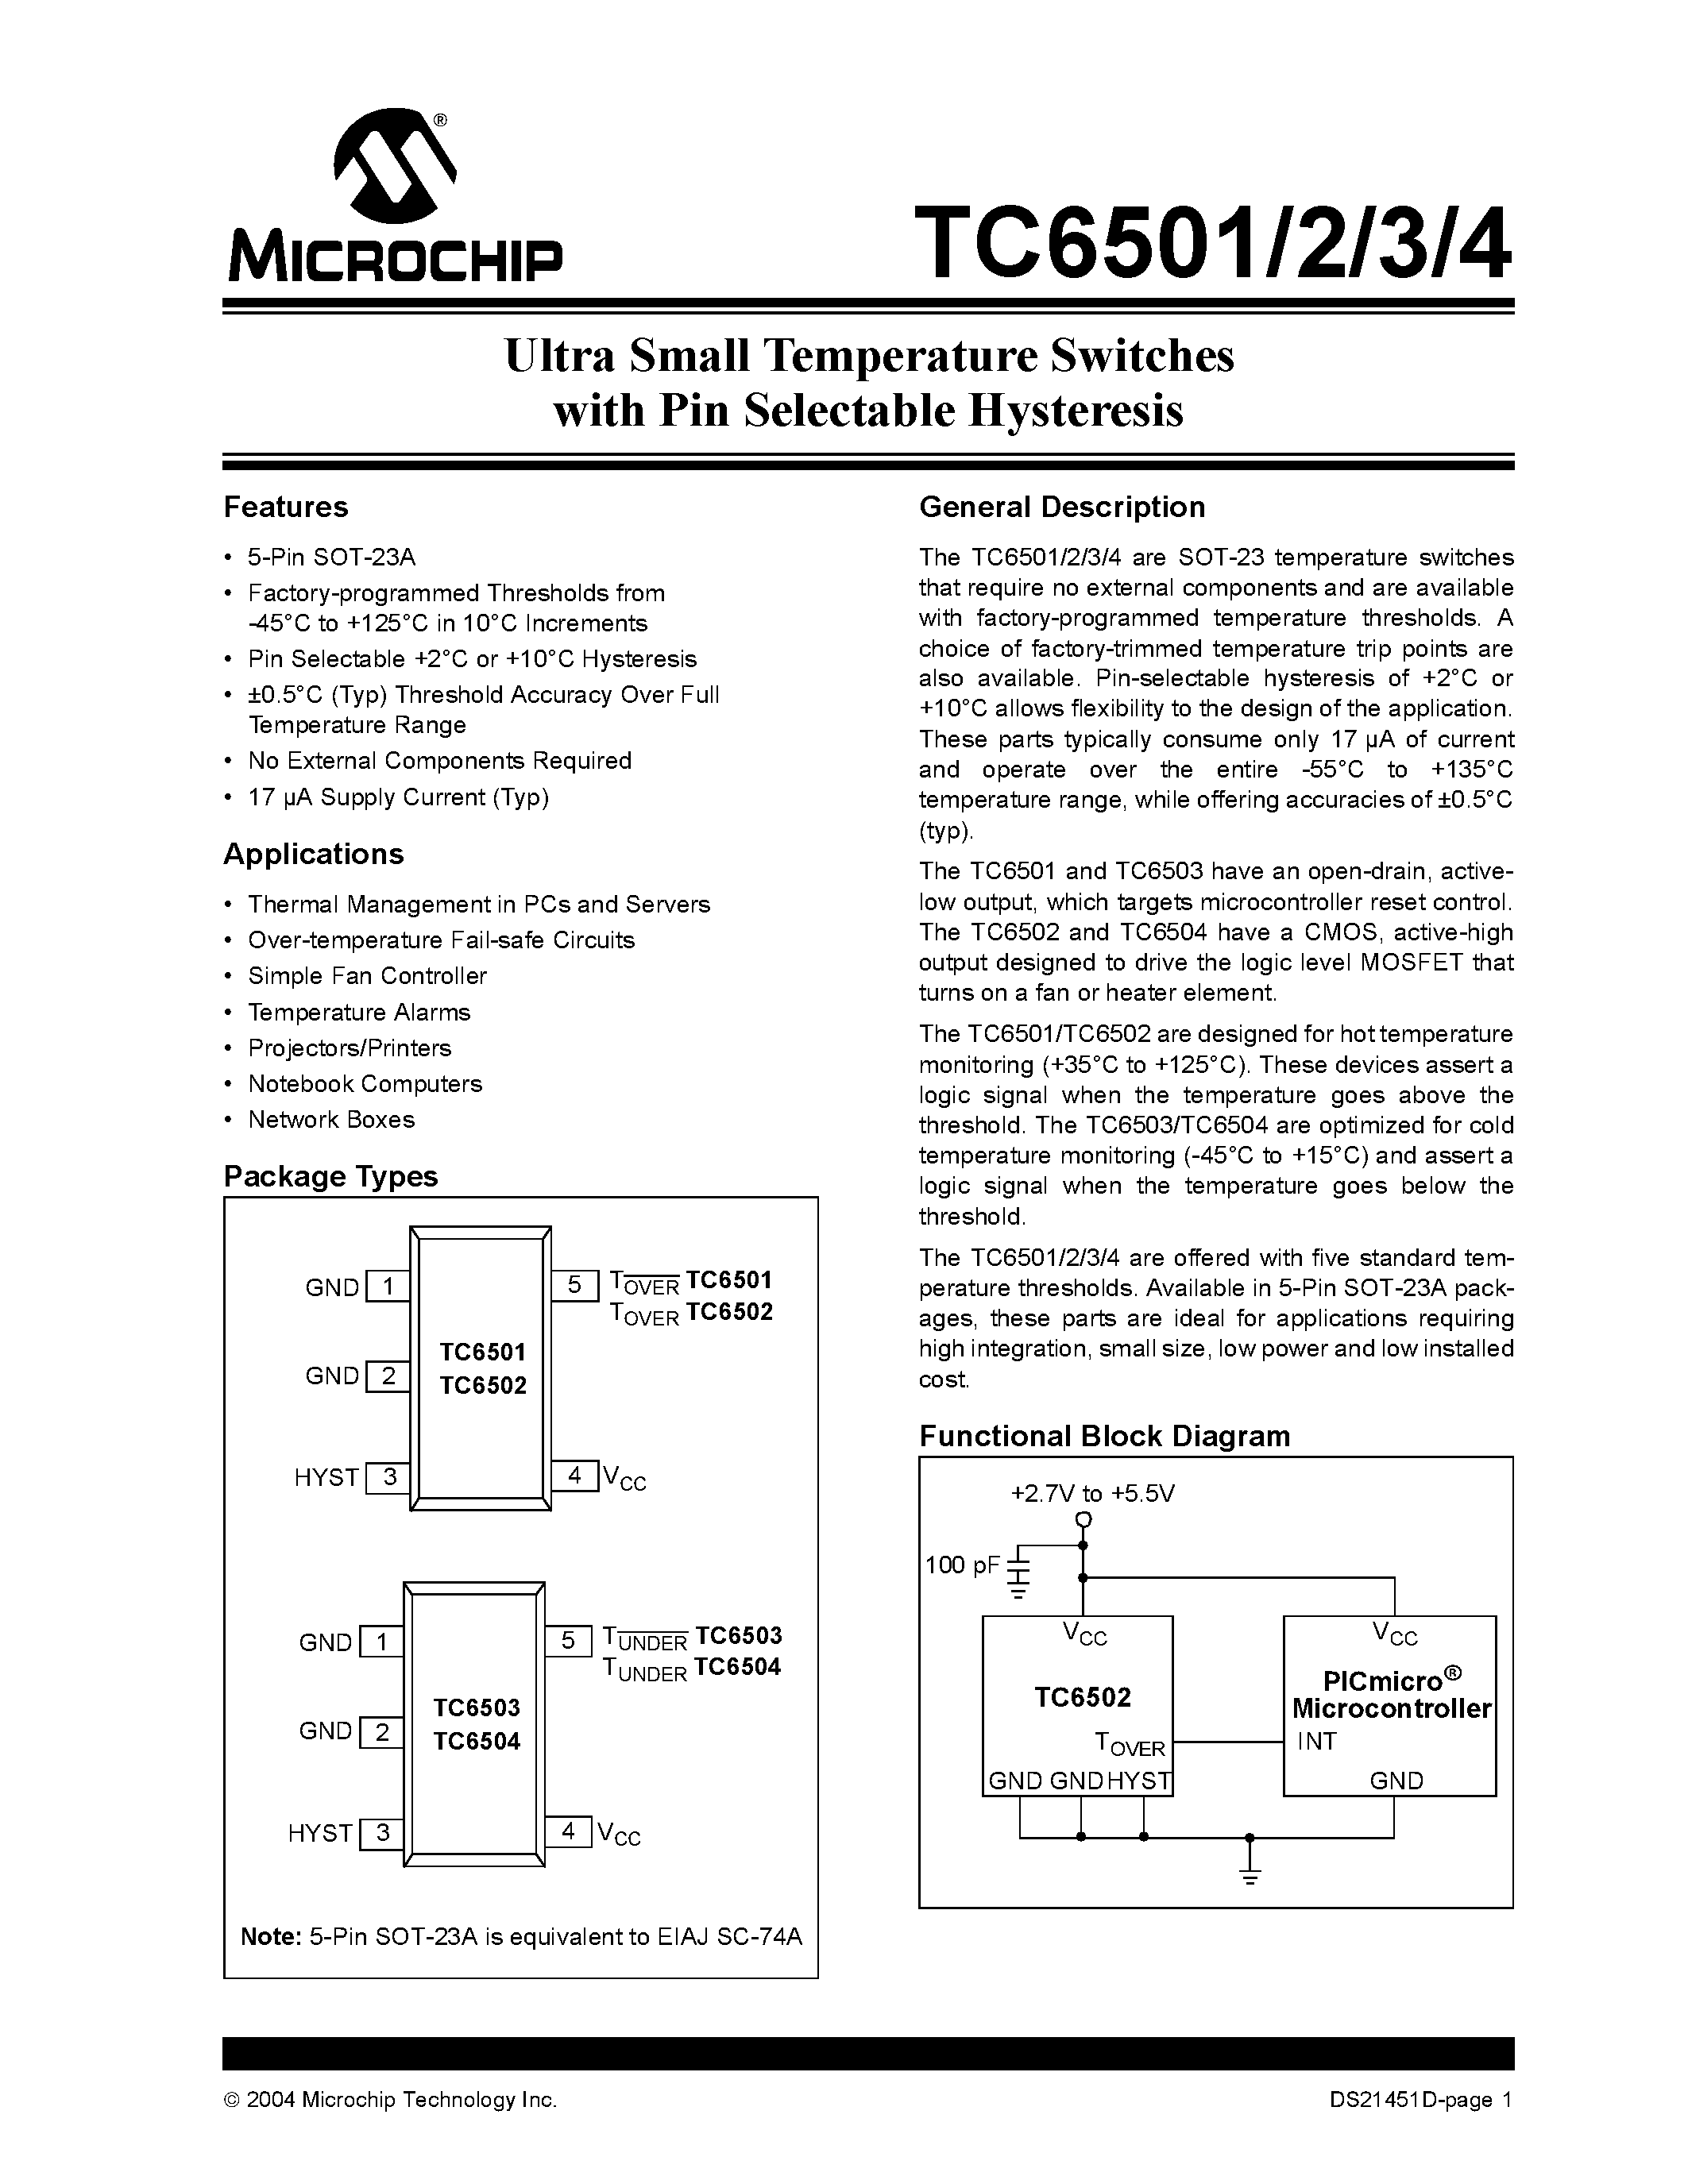 Datasheet TC6501 - (TC6501 - TC6504) Ultra Small Temperature Switches with Pin Selectable Hysteresis page 1